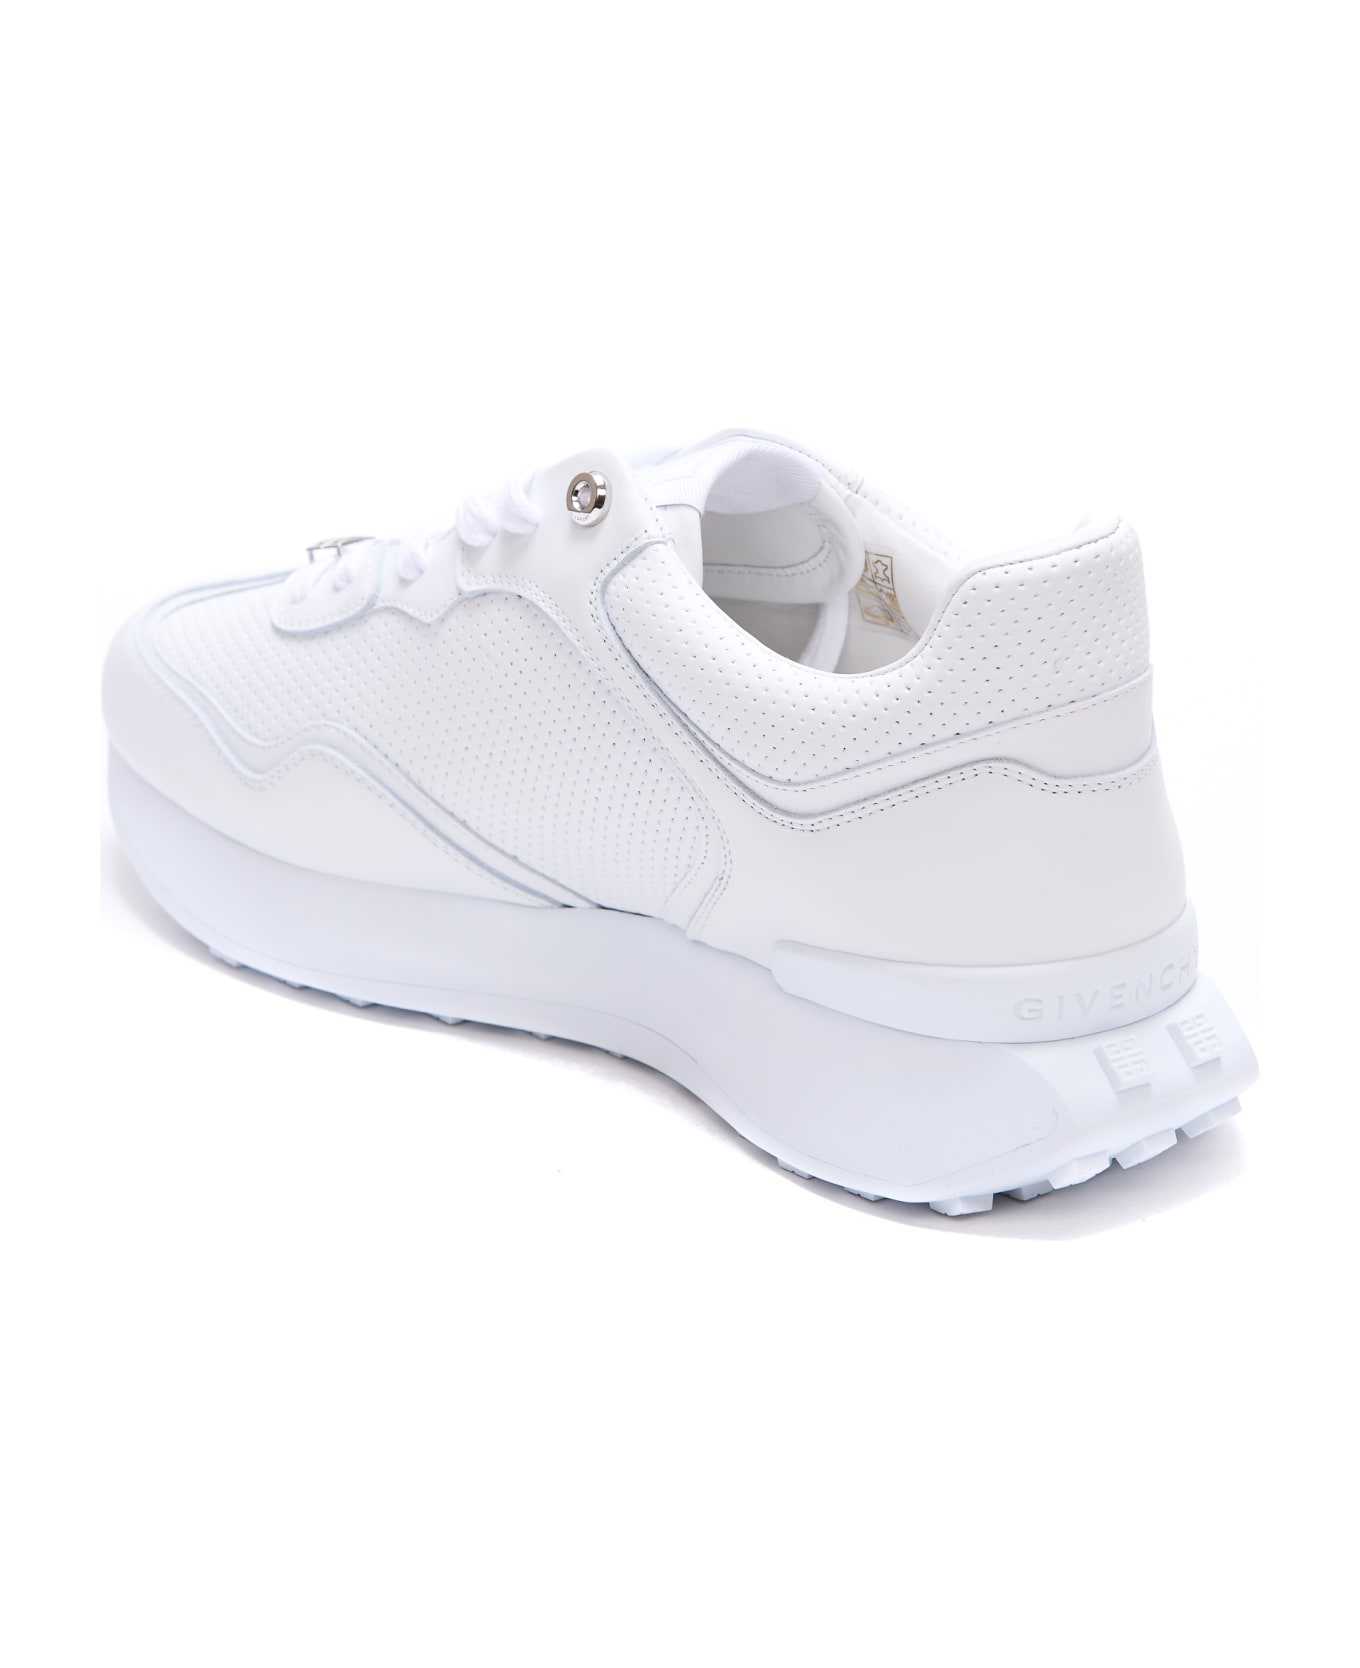 Givenchy Runner Sneakers - BIANCO